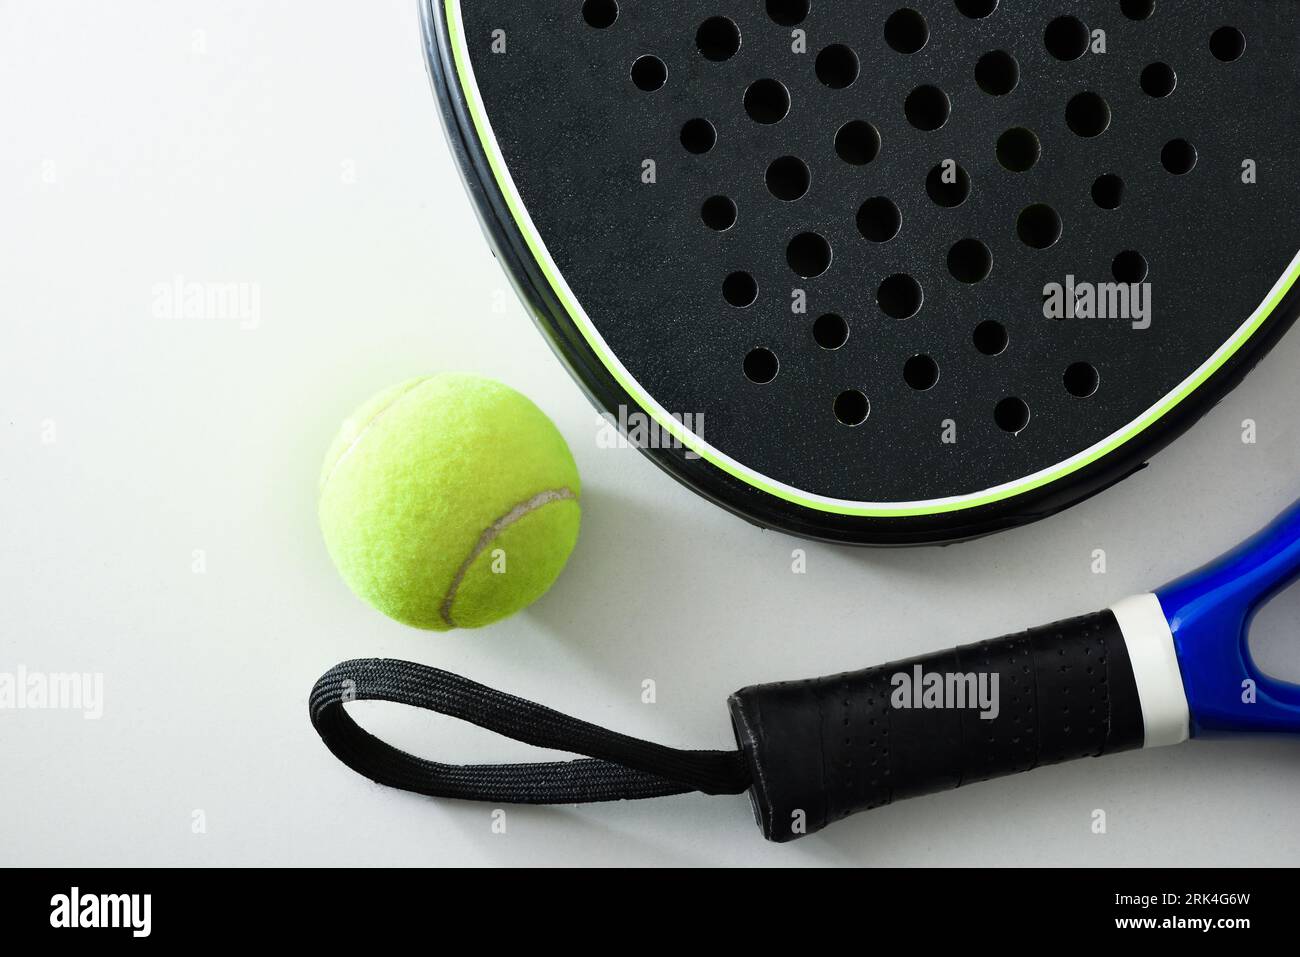 Two blue and black paddle rackets detail on white table with a ball. Top view. Stock Photo